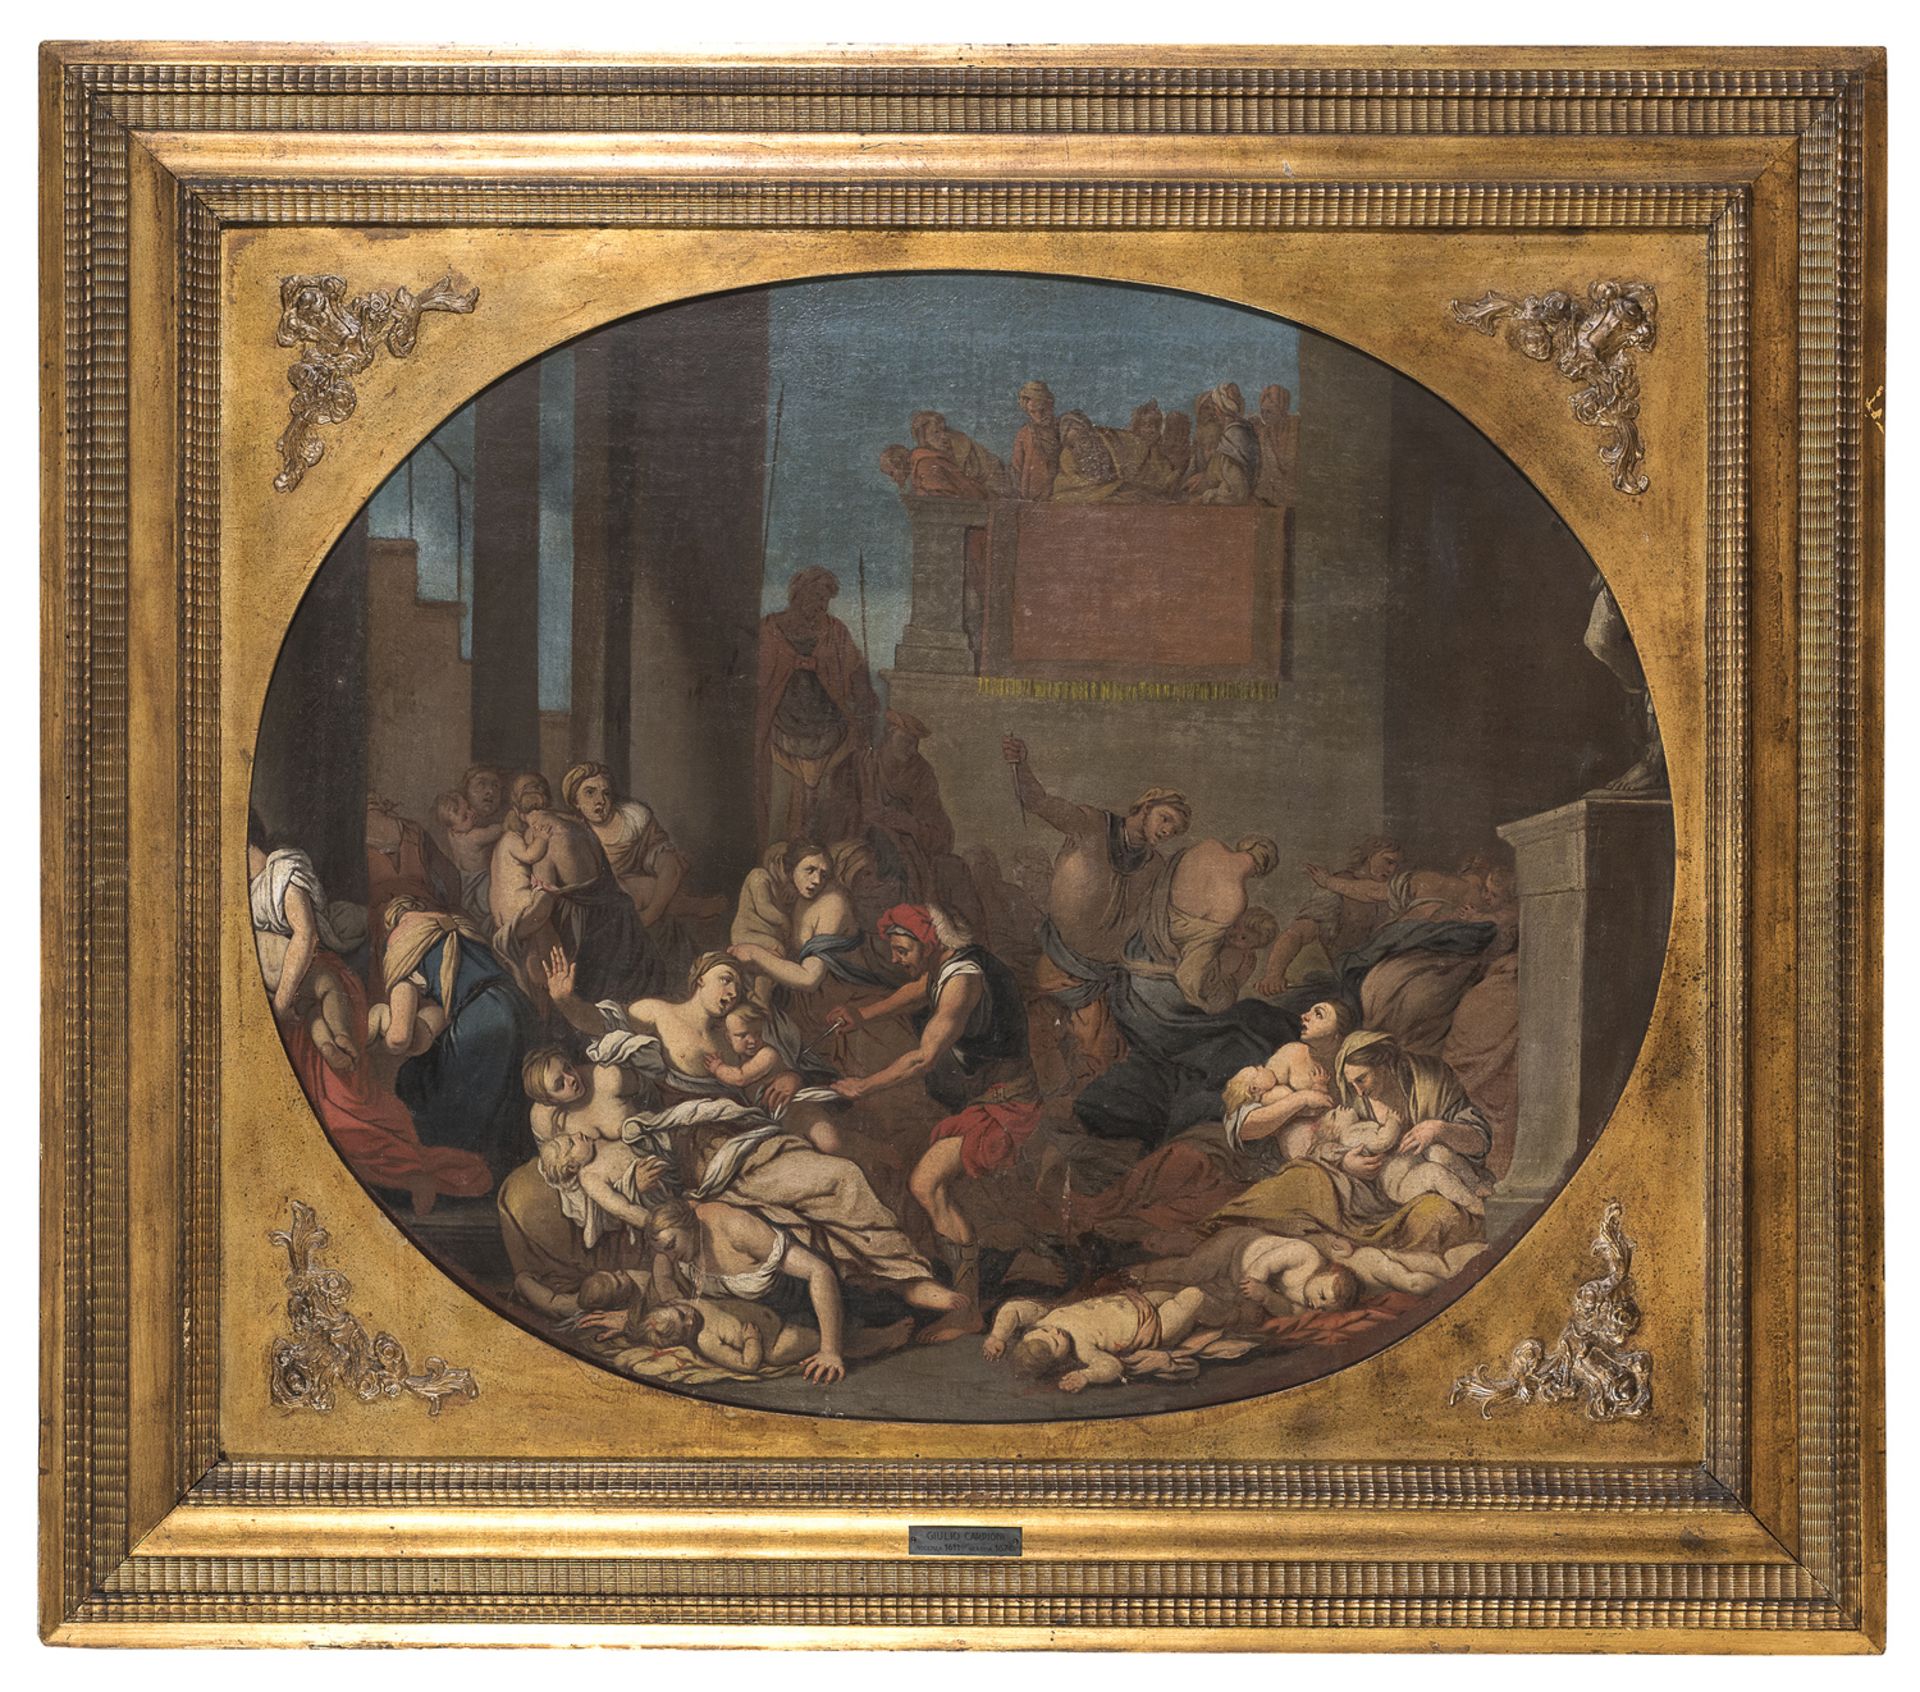 OIL PAINTING OF THE MASSACRE OF THE INNOCENTS ATTRIBUTED TO GIULIO CARPIONI